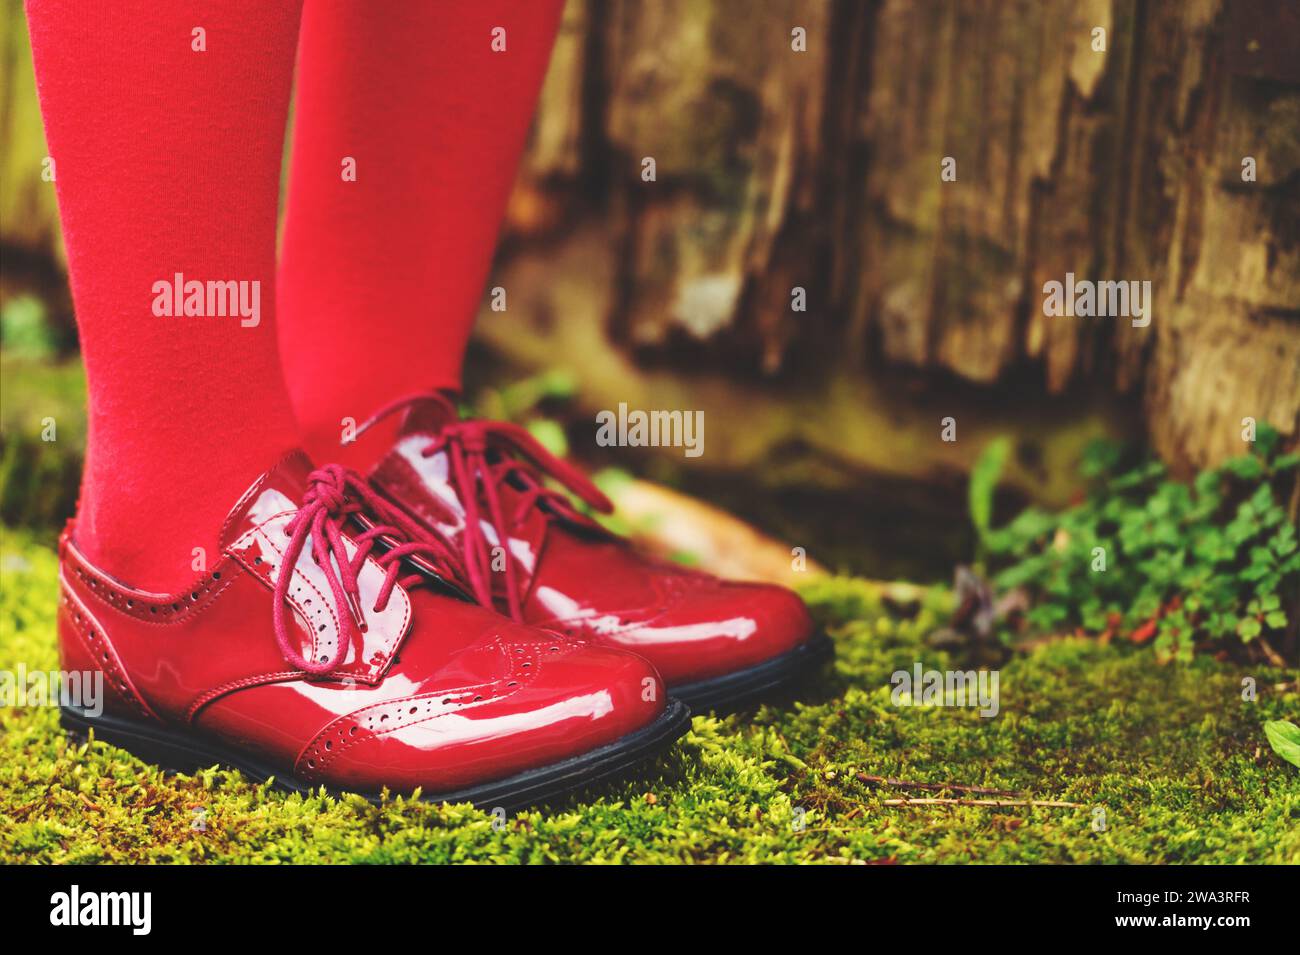 Fashion modern red shoes on kid's feet Stock Photo